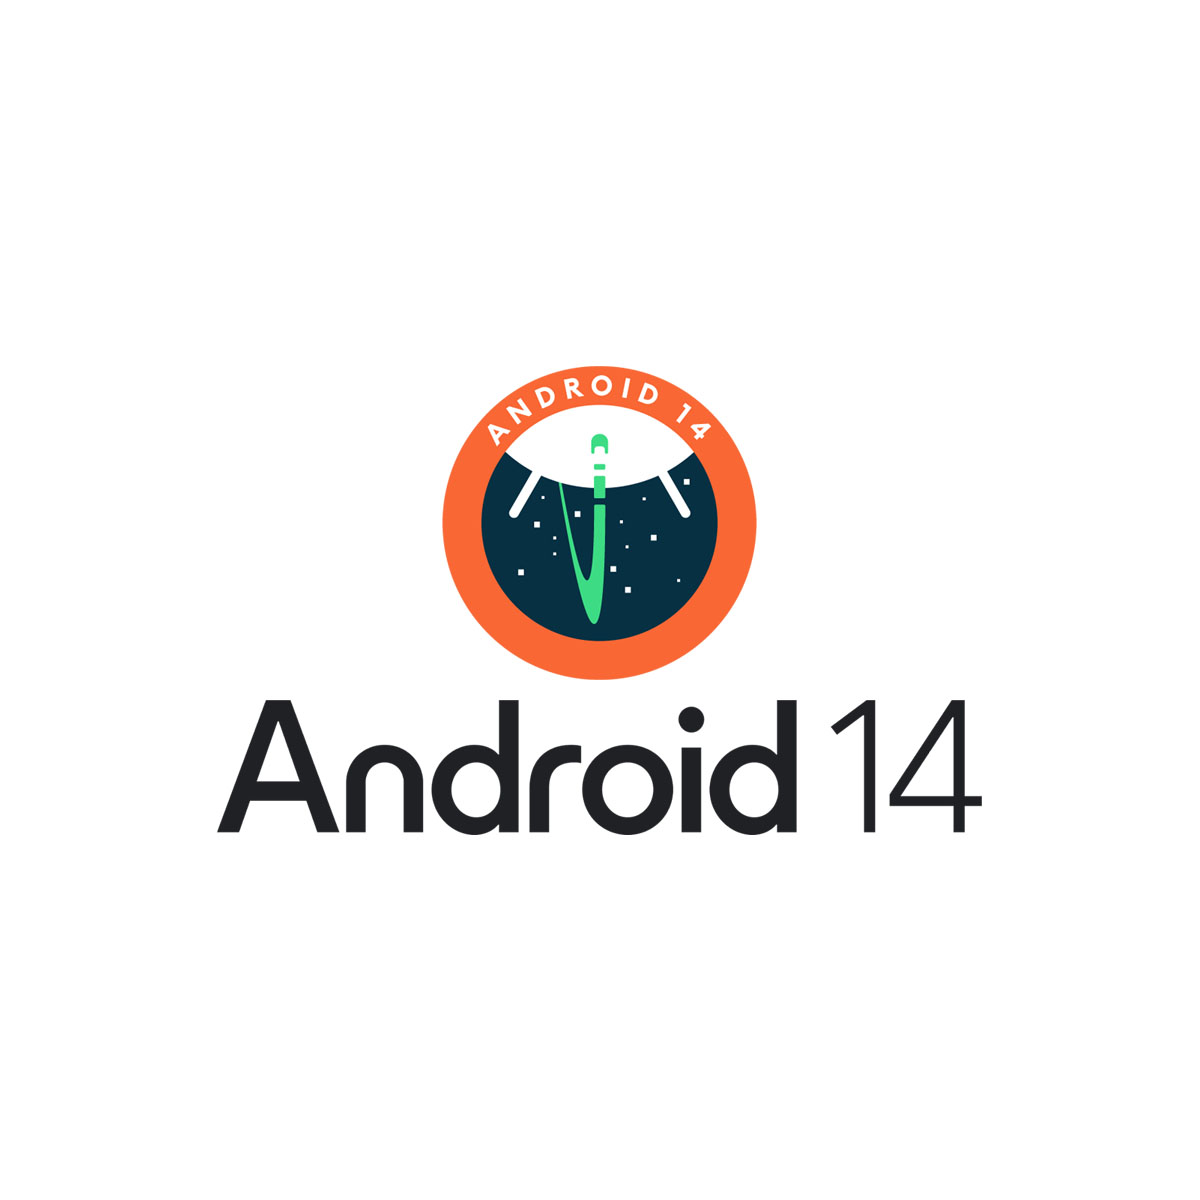 Information regarding Android 14 compatibility